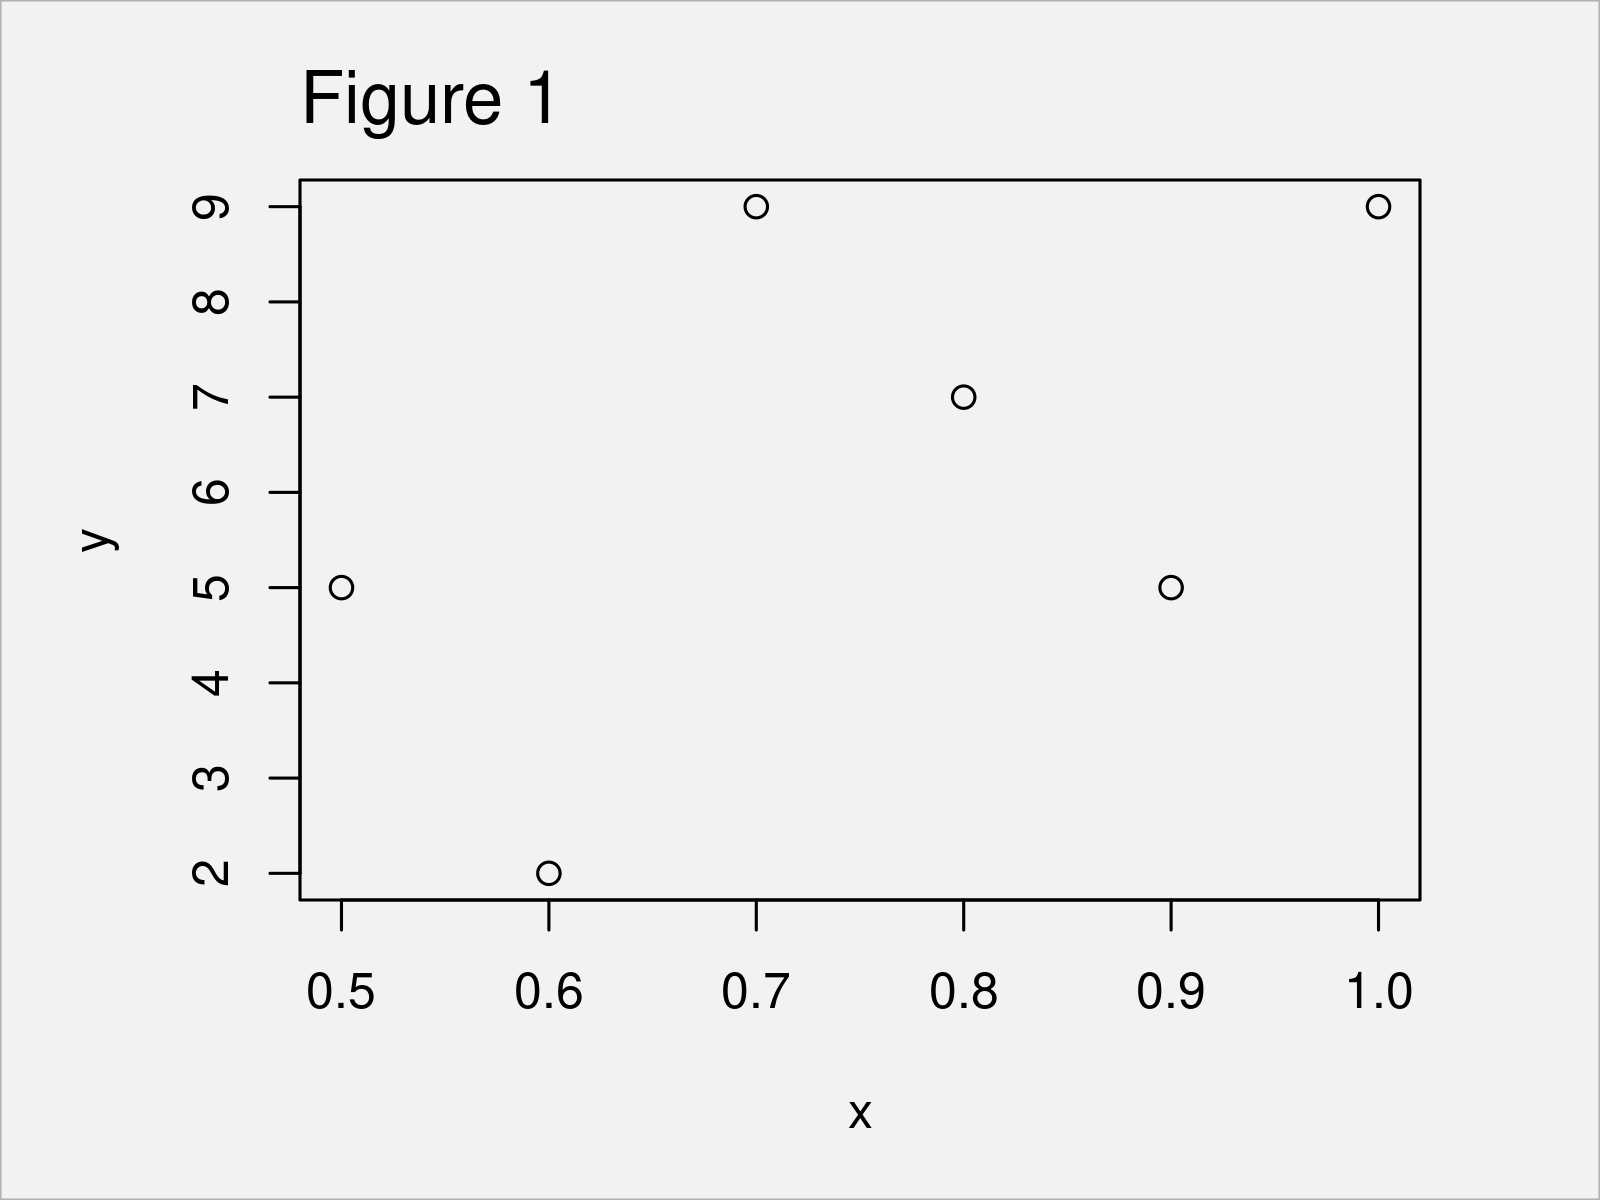 r graph figure 1 change number decimal places on axis tick labels r